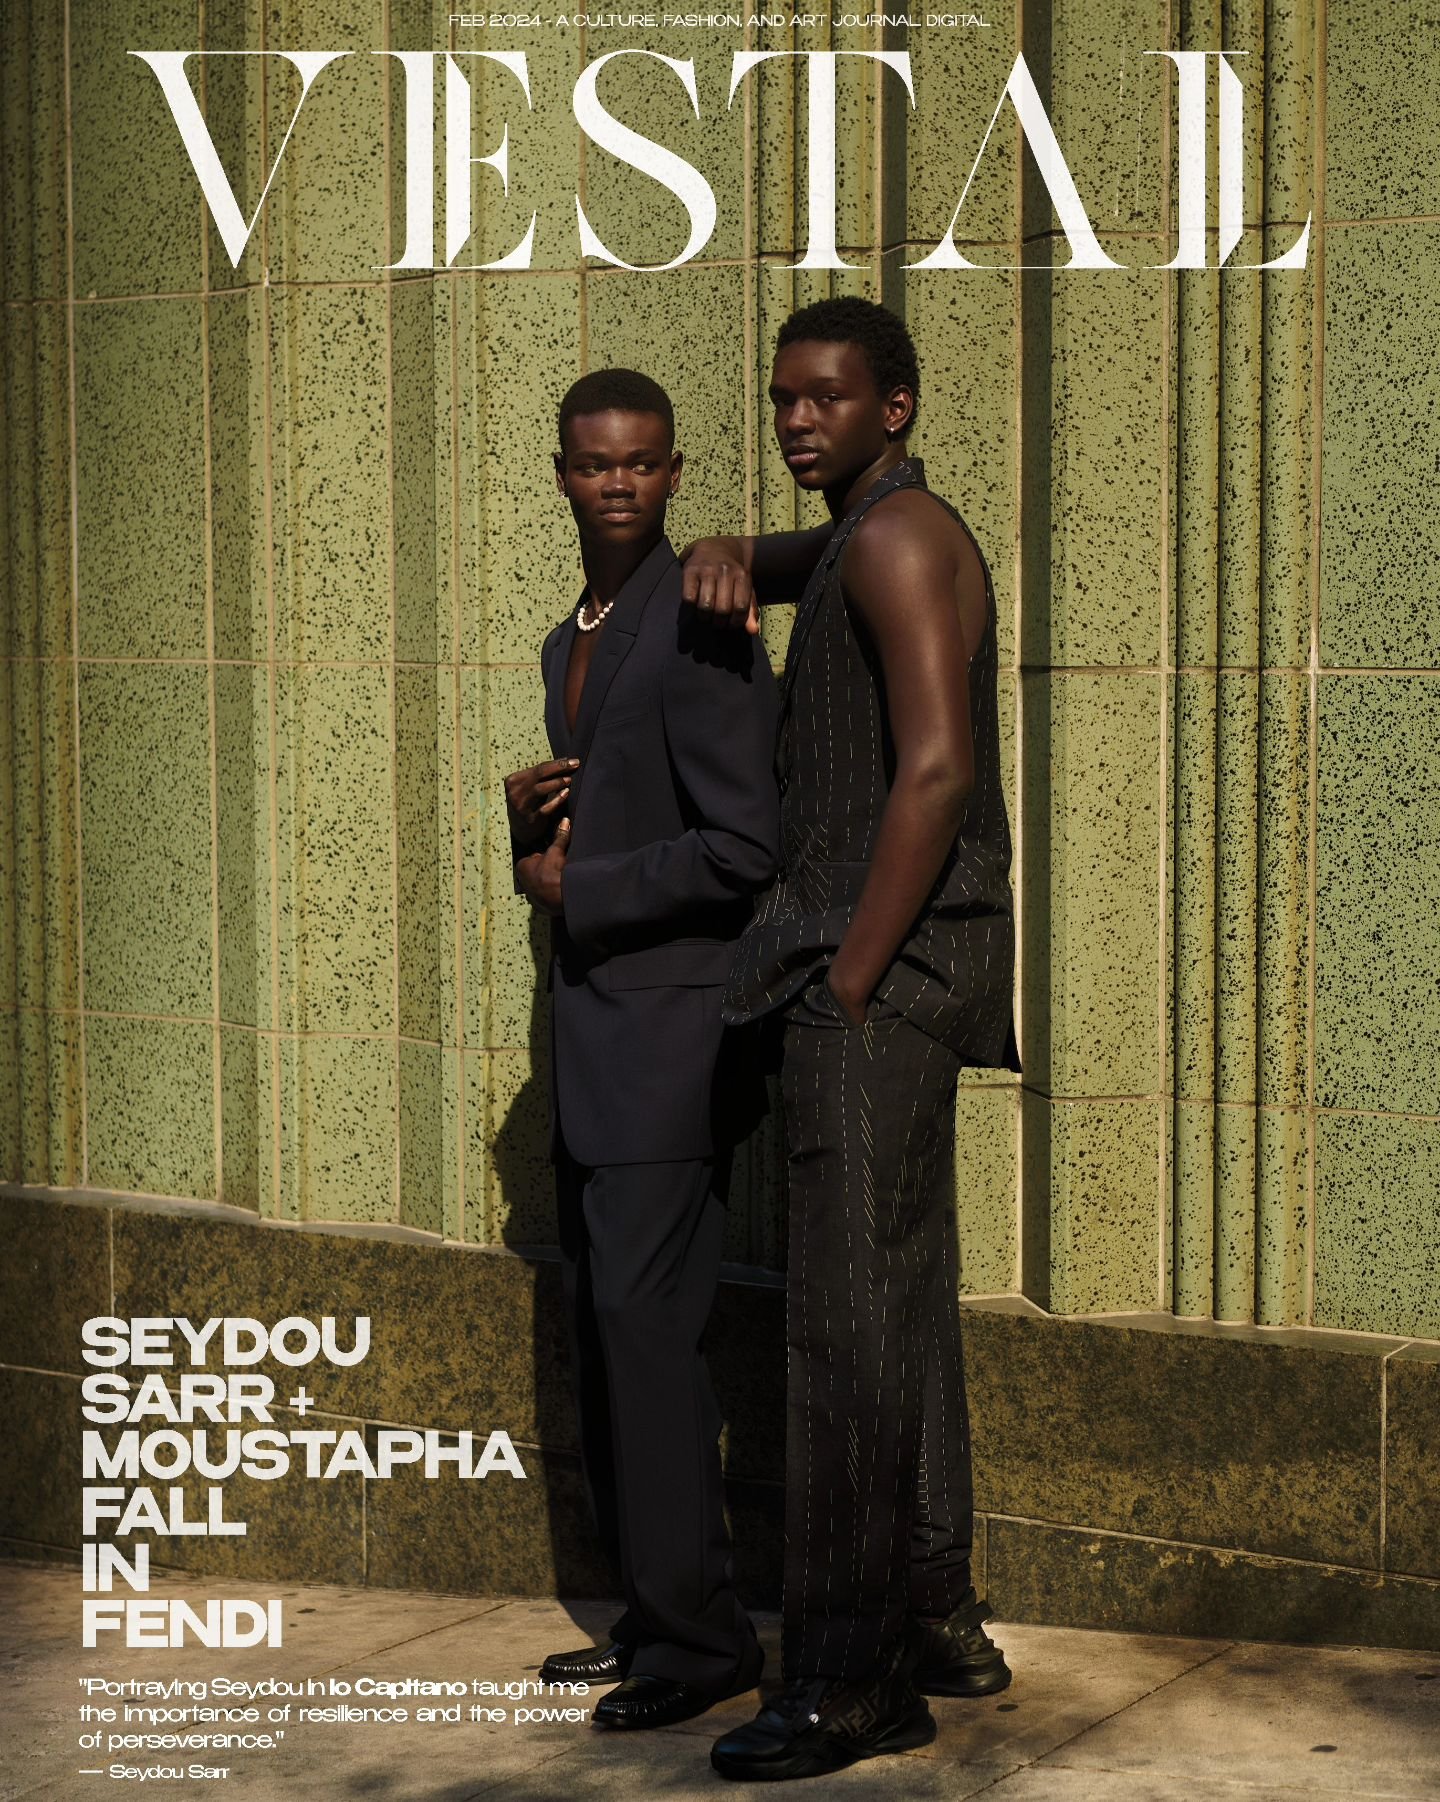 Oscar nominated for Best International Feature Film &ldquo;Io Capitano&rdquo; leading actors Seydou Sarr ( @sipaulsarr ) and Moustapha Fall ( @prince_noir__officiel ) in @fendi&nbsp;

In the thought-provoking film &ldquo;Io Capitano,&rdquo; directed 